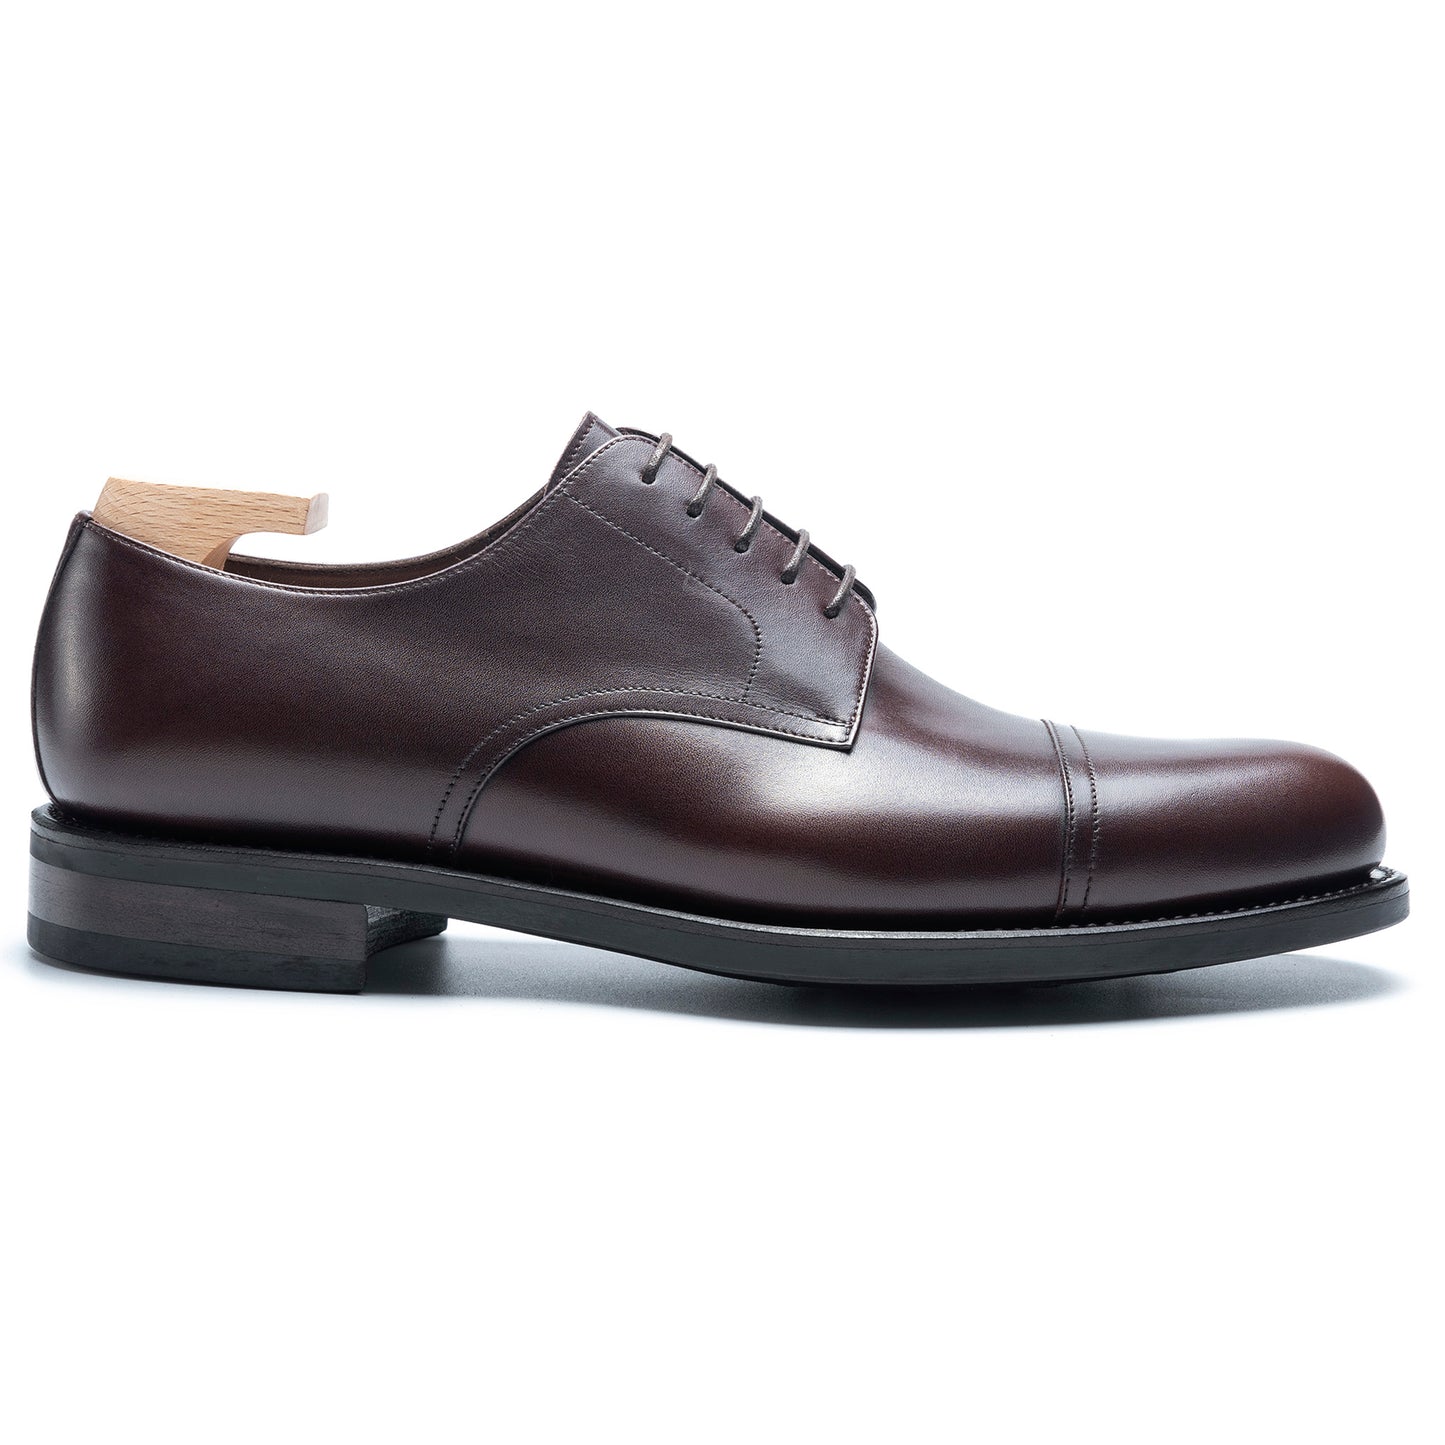 TLB Mallorca leather shoes 691 / MADISON / VEGANO BROWN